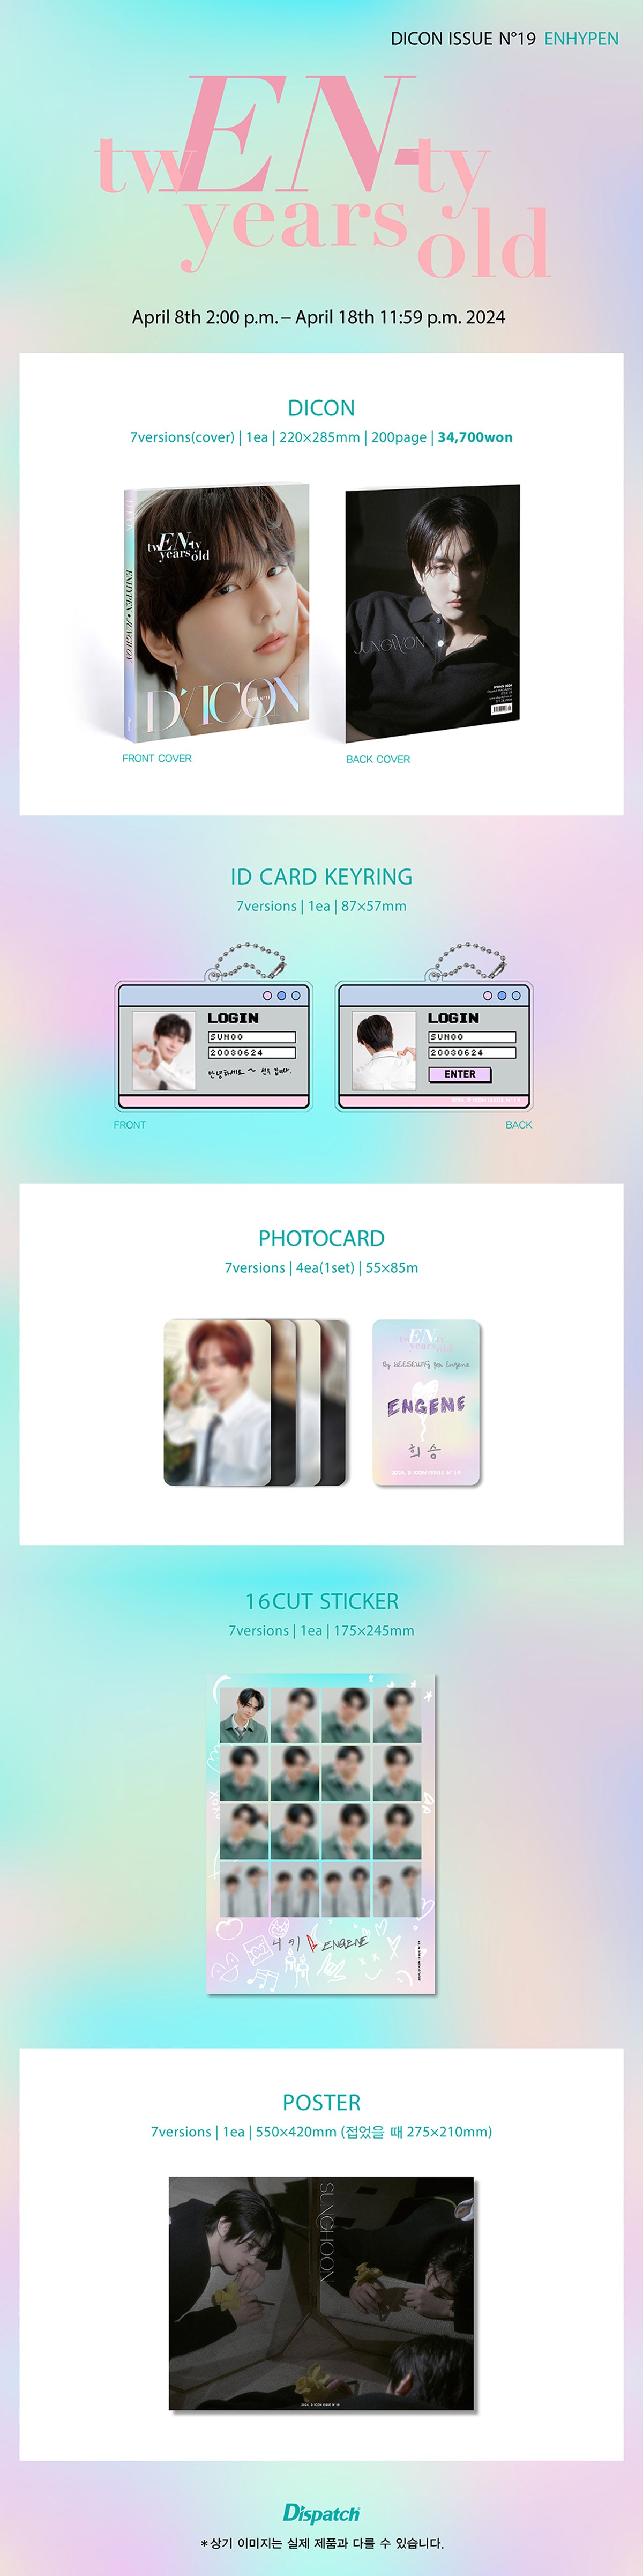 1 DICON (200 pages)
1 ID Card Keyring
4 Photo Cards
1 16-cut Sticker
1 Folded Poster